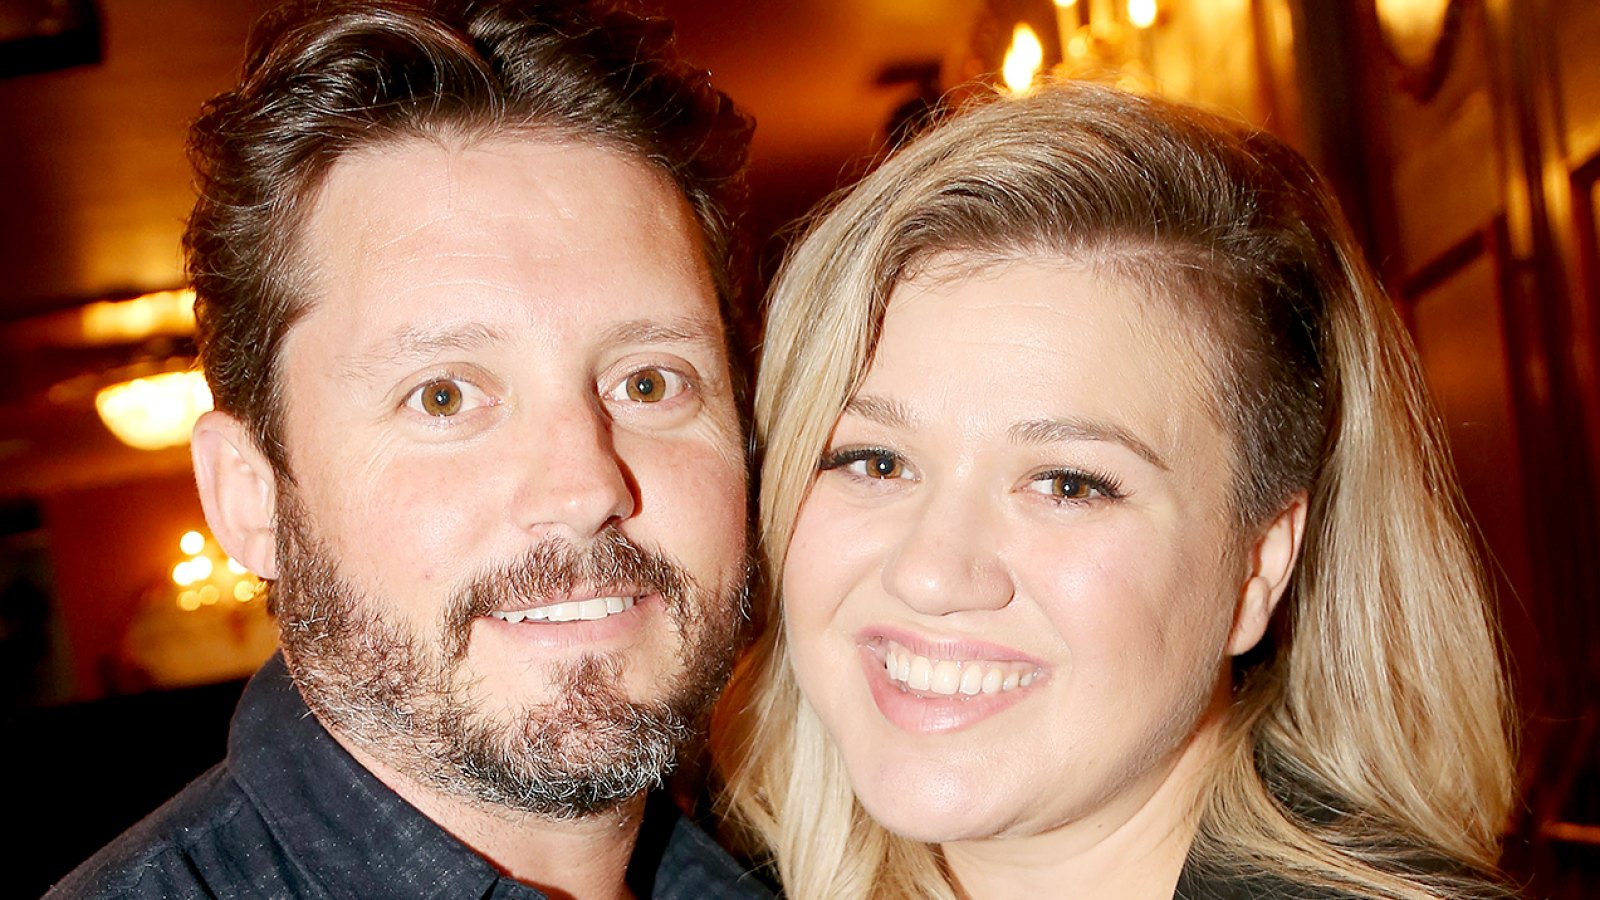 Brandon Blackstock and Kelly Clarkson pose backstage at the hit musical "Finding Neverland" on Broadway at The Lunt Fontanne Theater on July 15, 2015 in New York City.